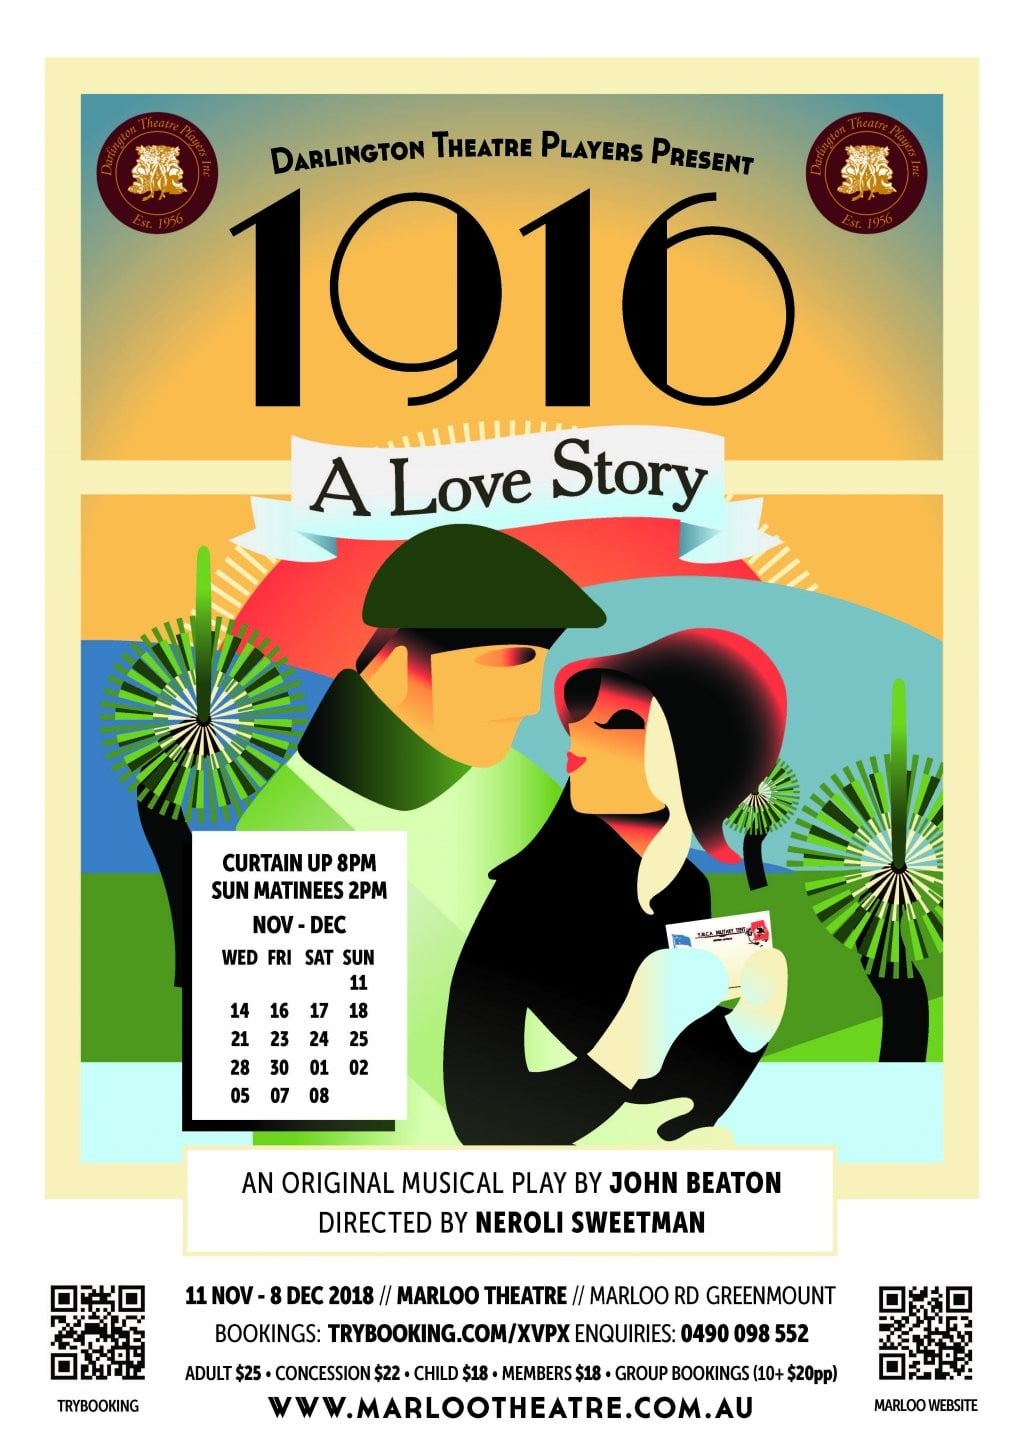 1916 A Love Story